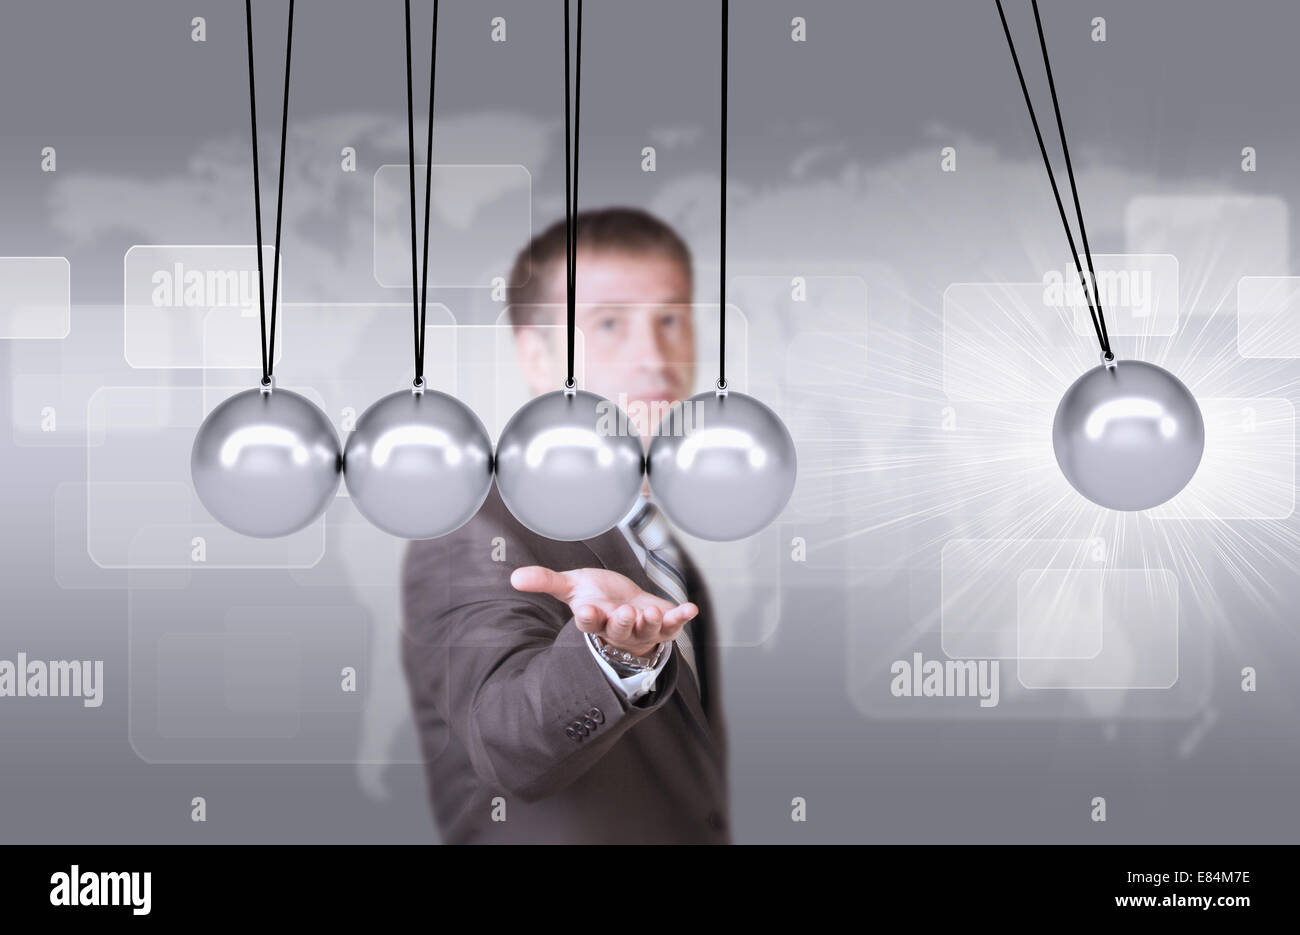 Businessman in suit hold Newtons cradle Stock Photo